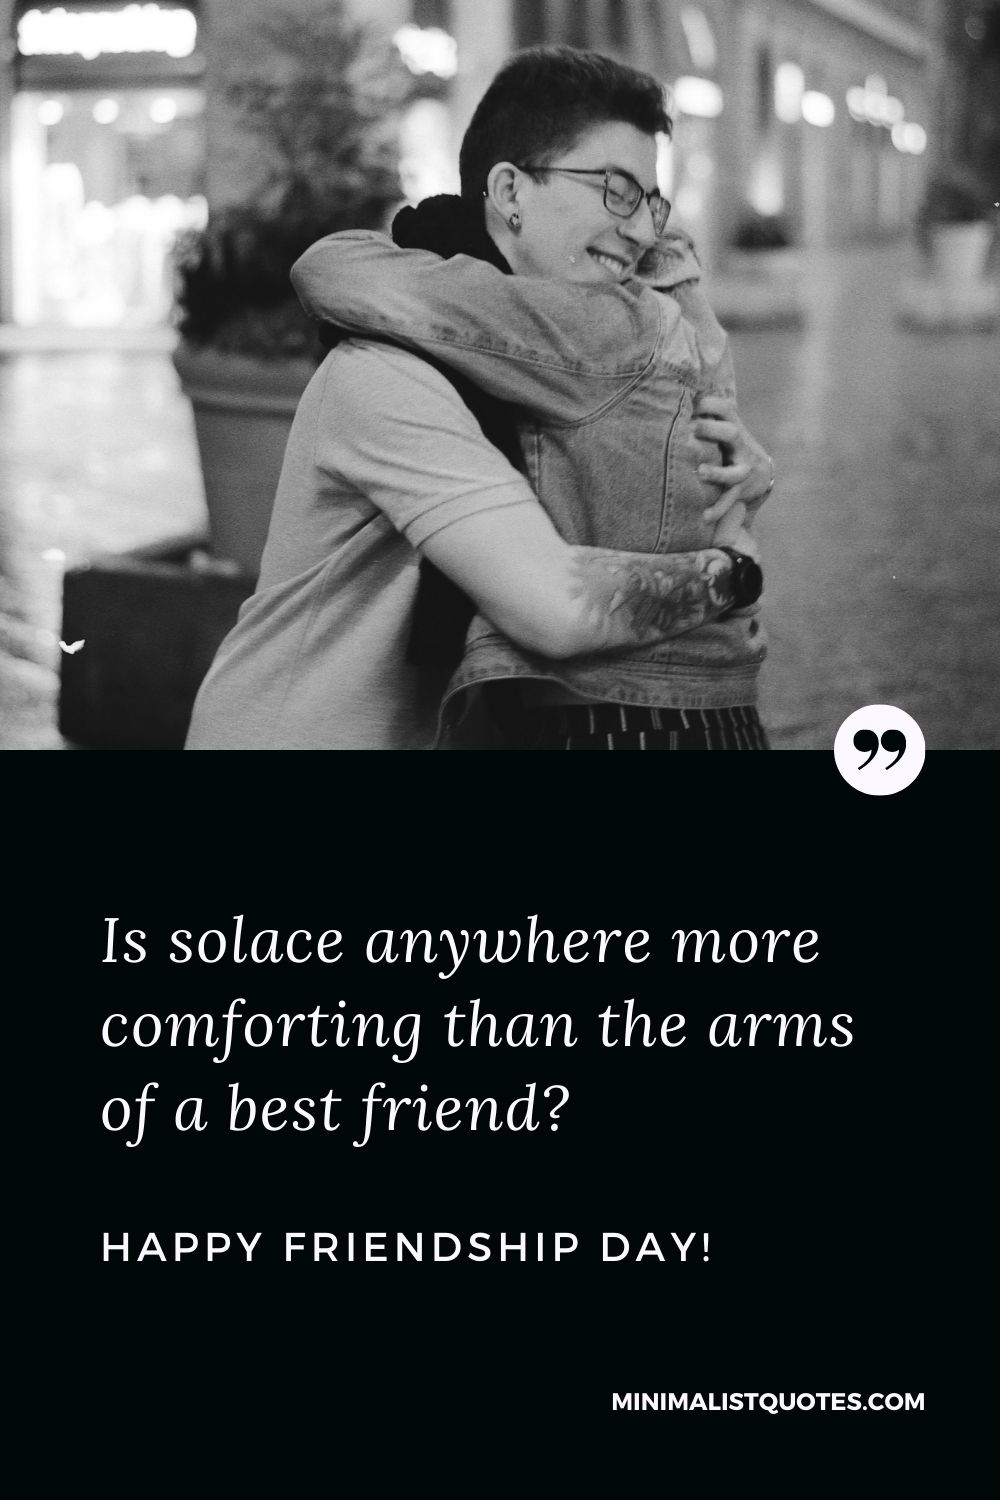 Friendship Day Wishes, Quotes & Messages | Minimalist Quotes